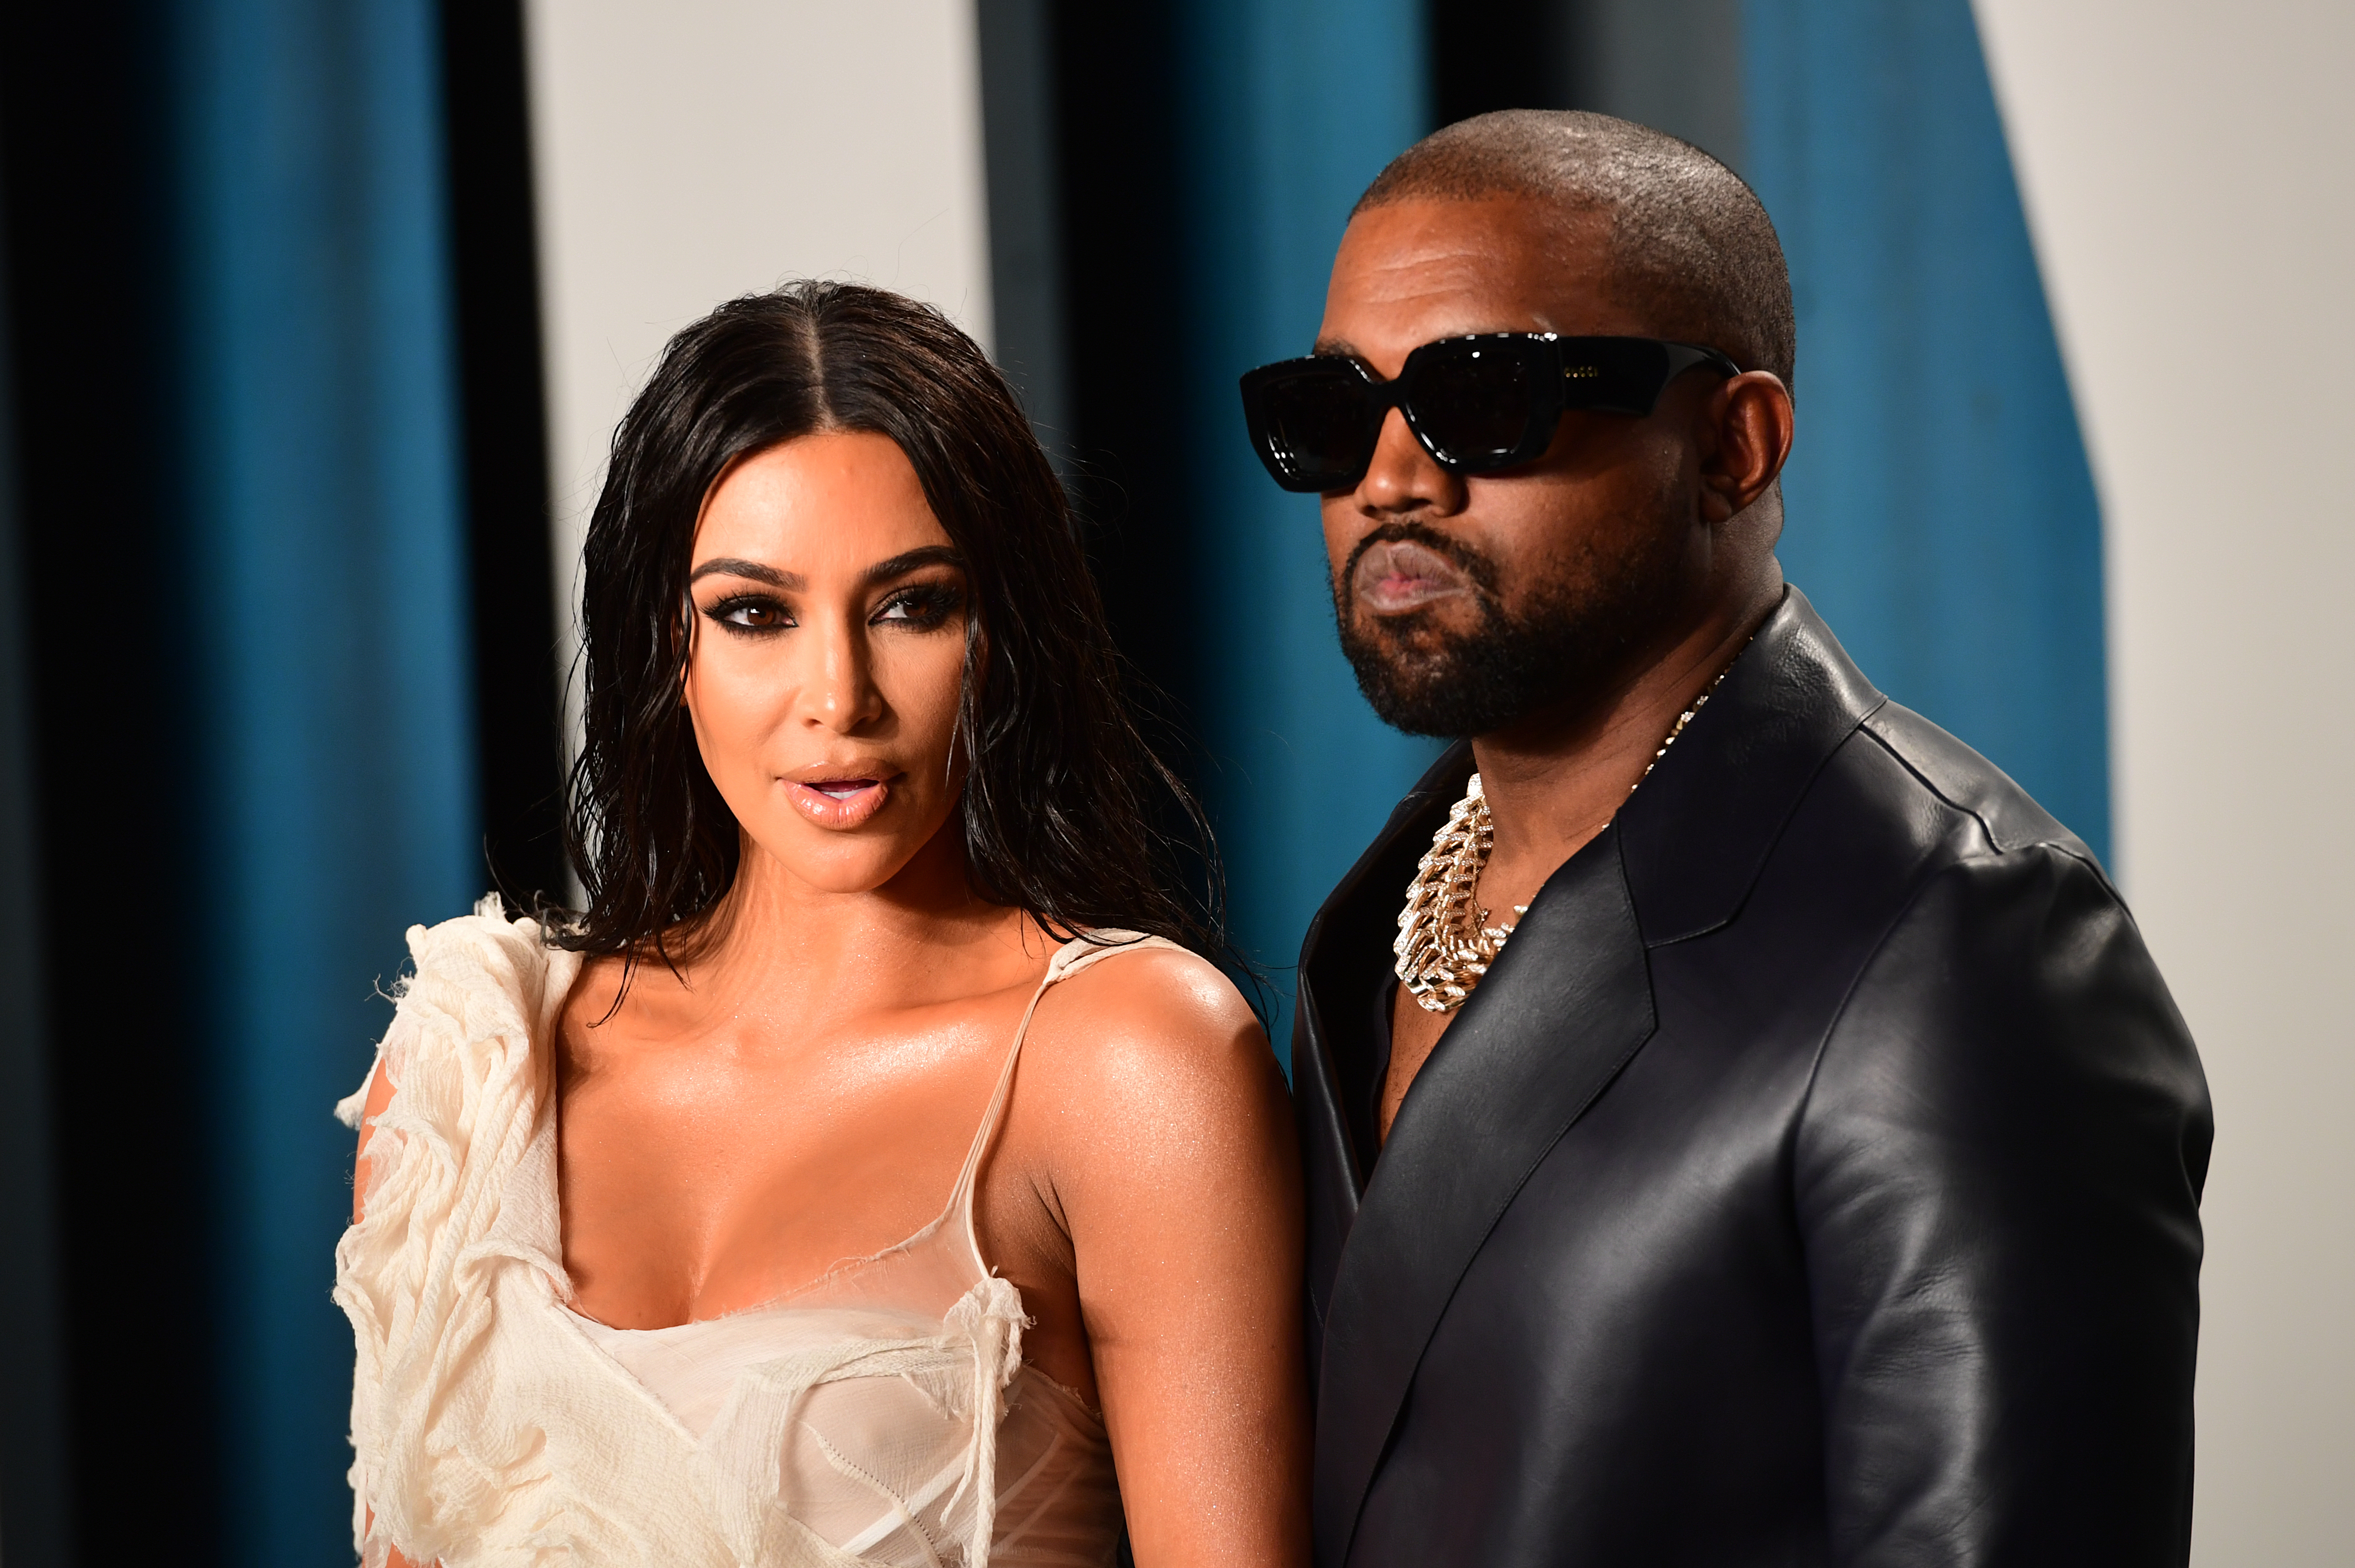 Kimye’s Marriage Woes Will Apparently Feature On The Final Season Of KUWTK & What, No Way